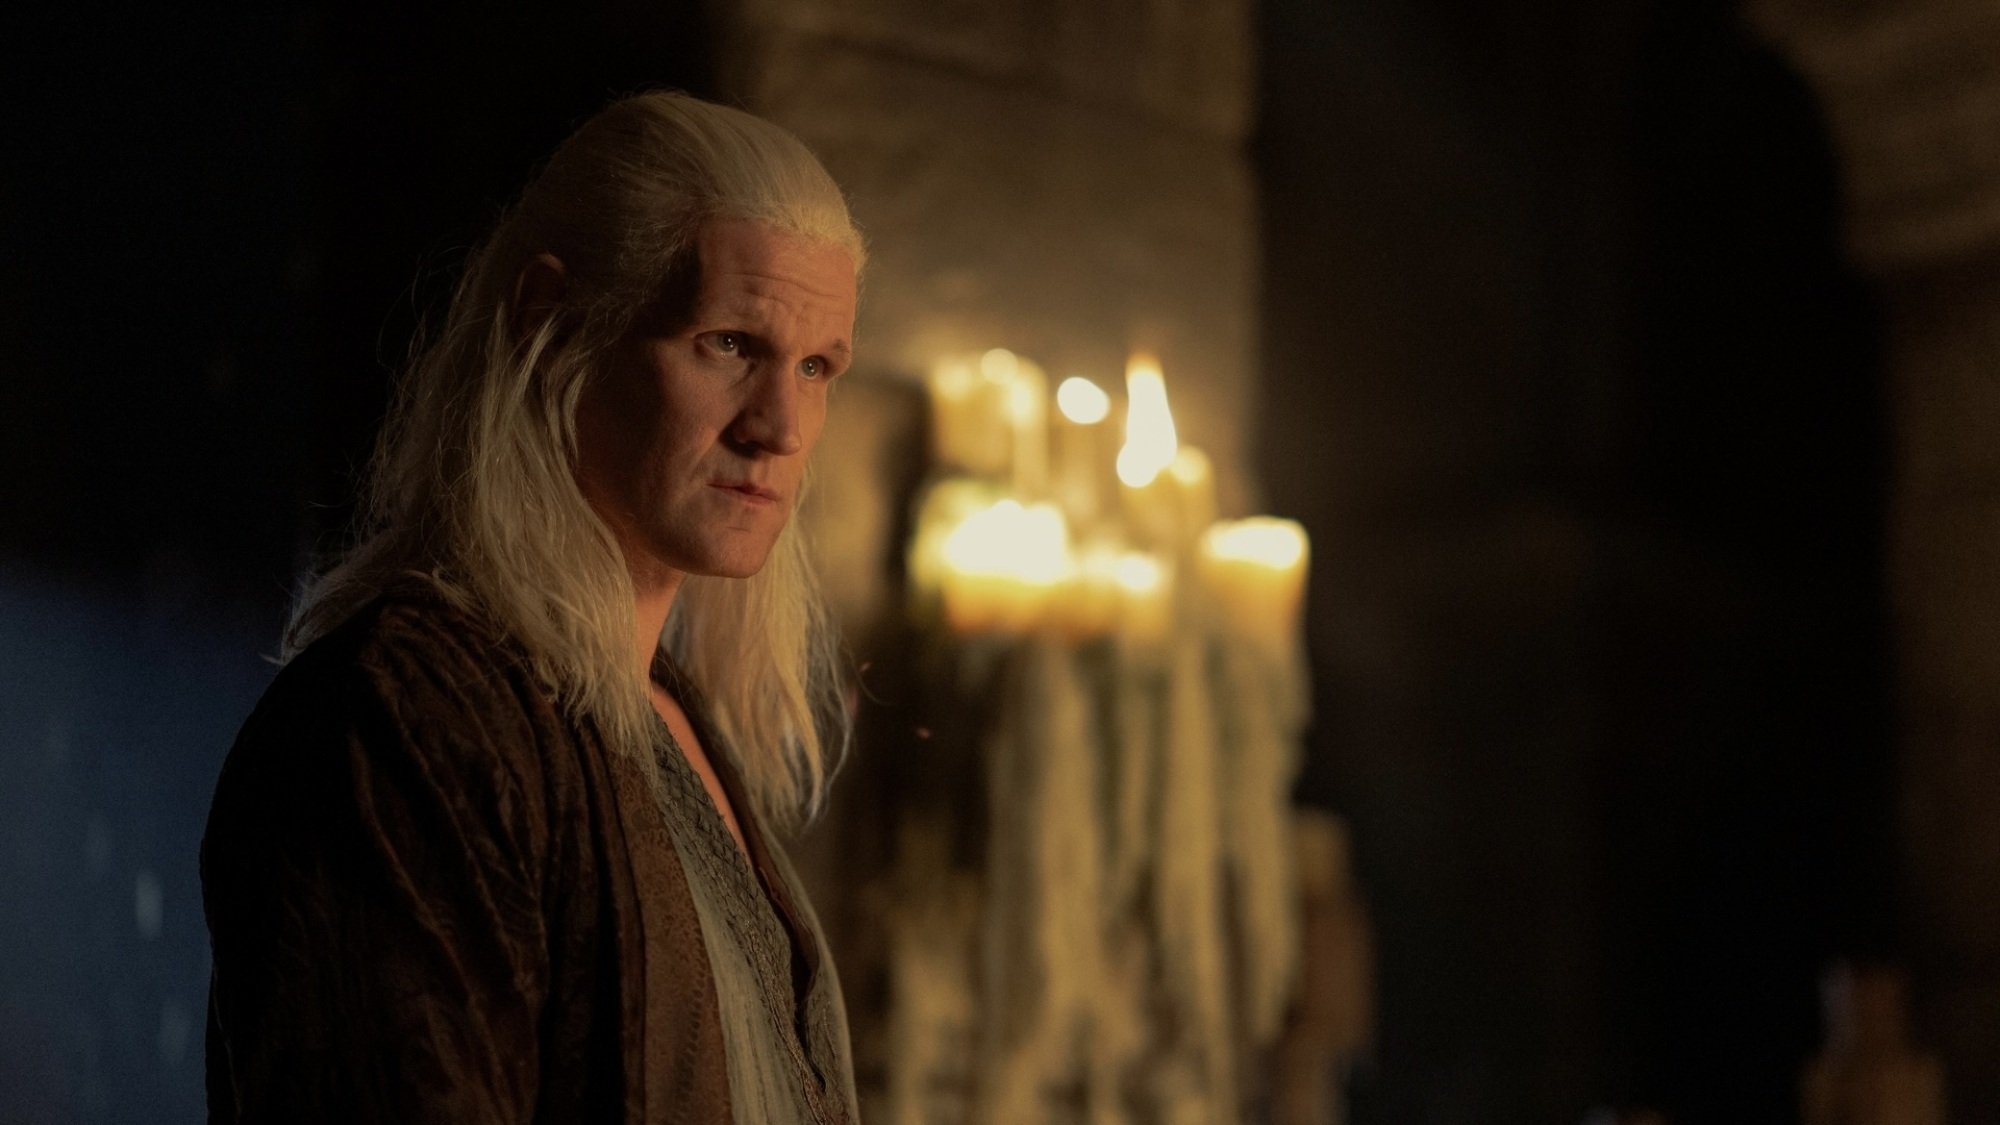 Daemon Targaryen in Harrenhal in his nightclothes, standing in front of a large altar of candles.